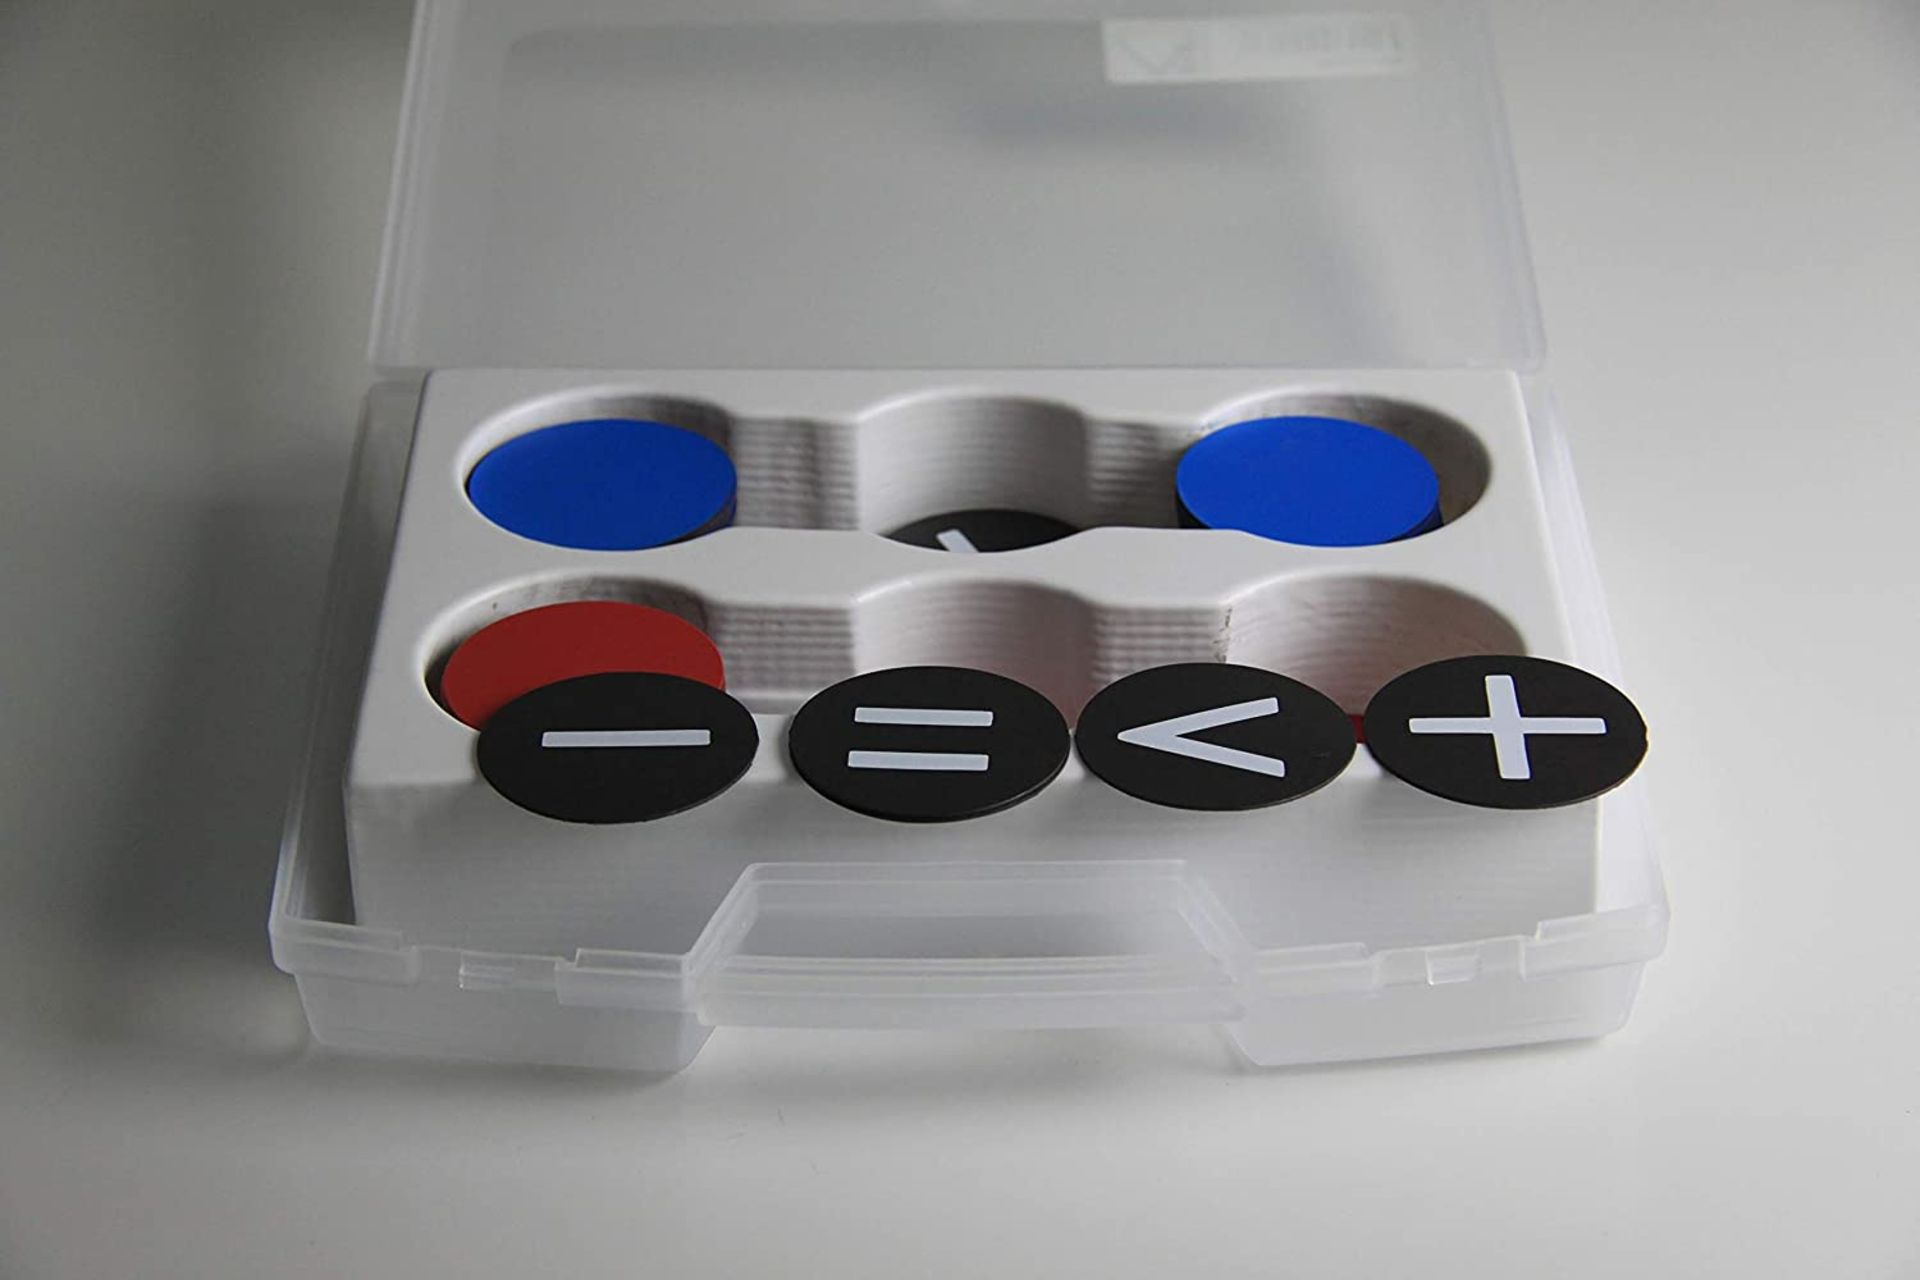 4 x WISSNER active learning 080802.000 Counting Chip Set II, Magnetic, Multi-Color |4260414062230